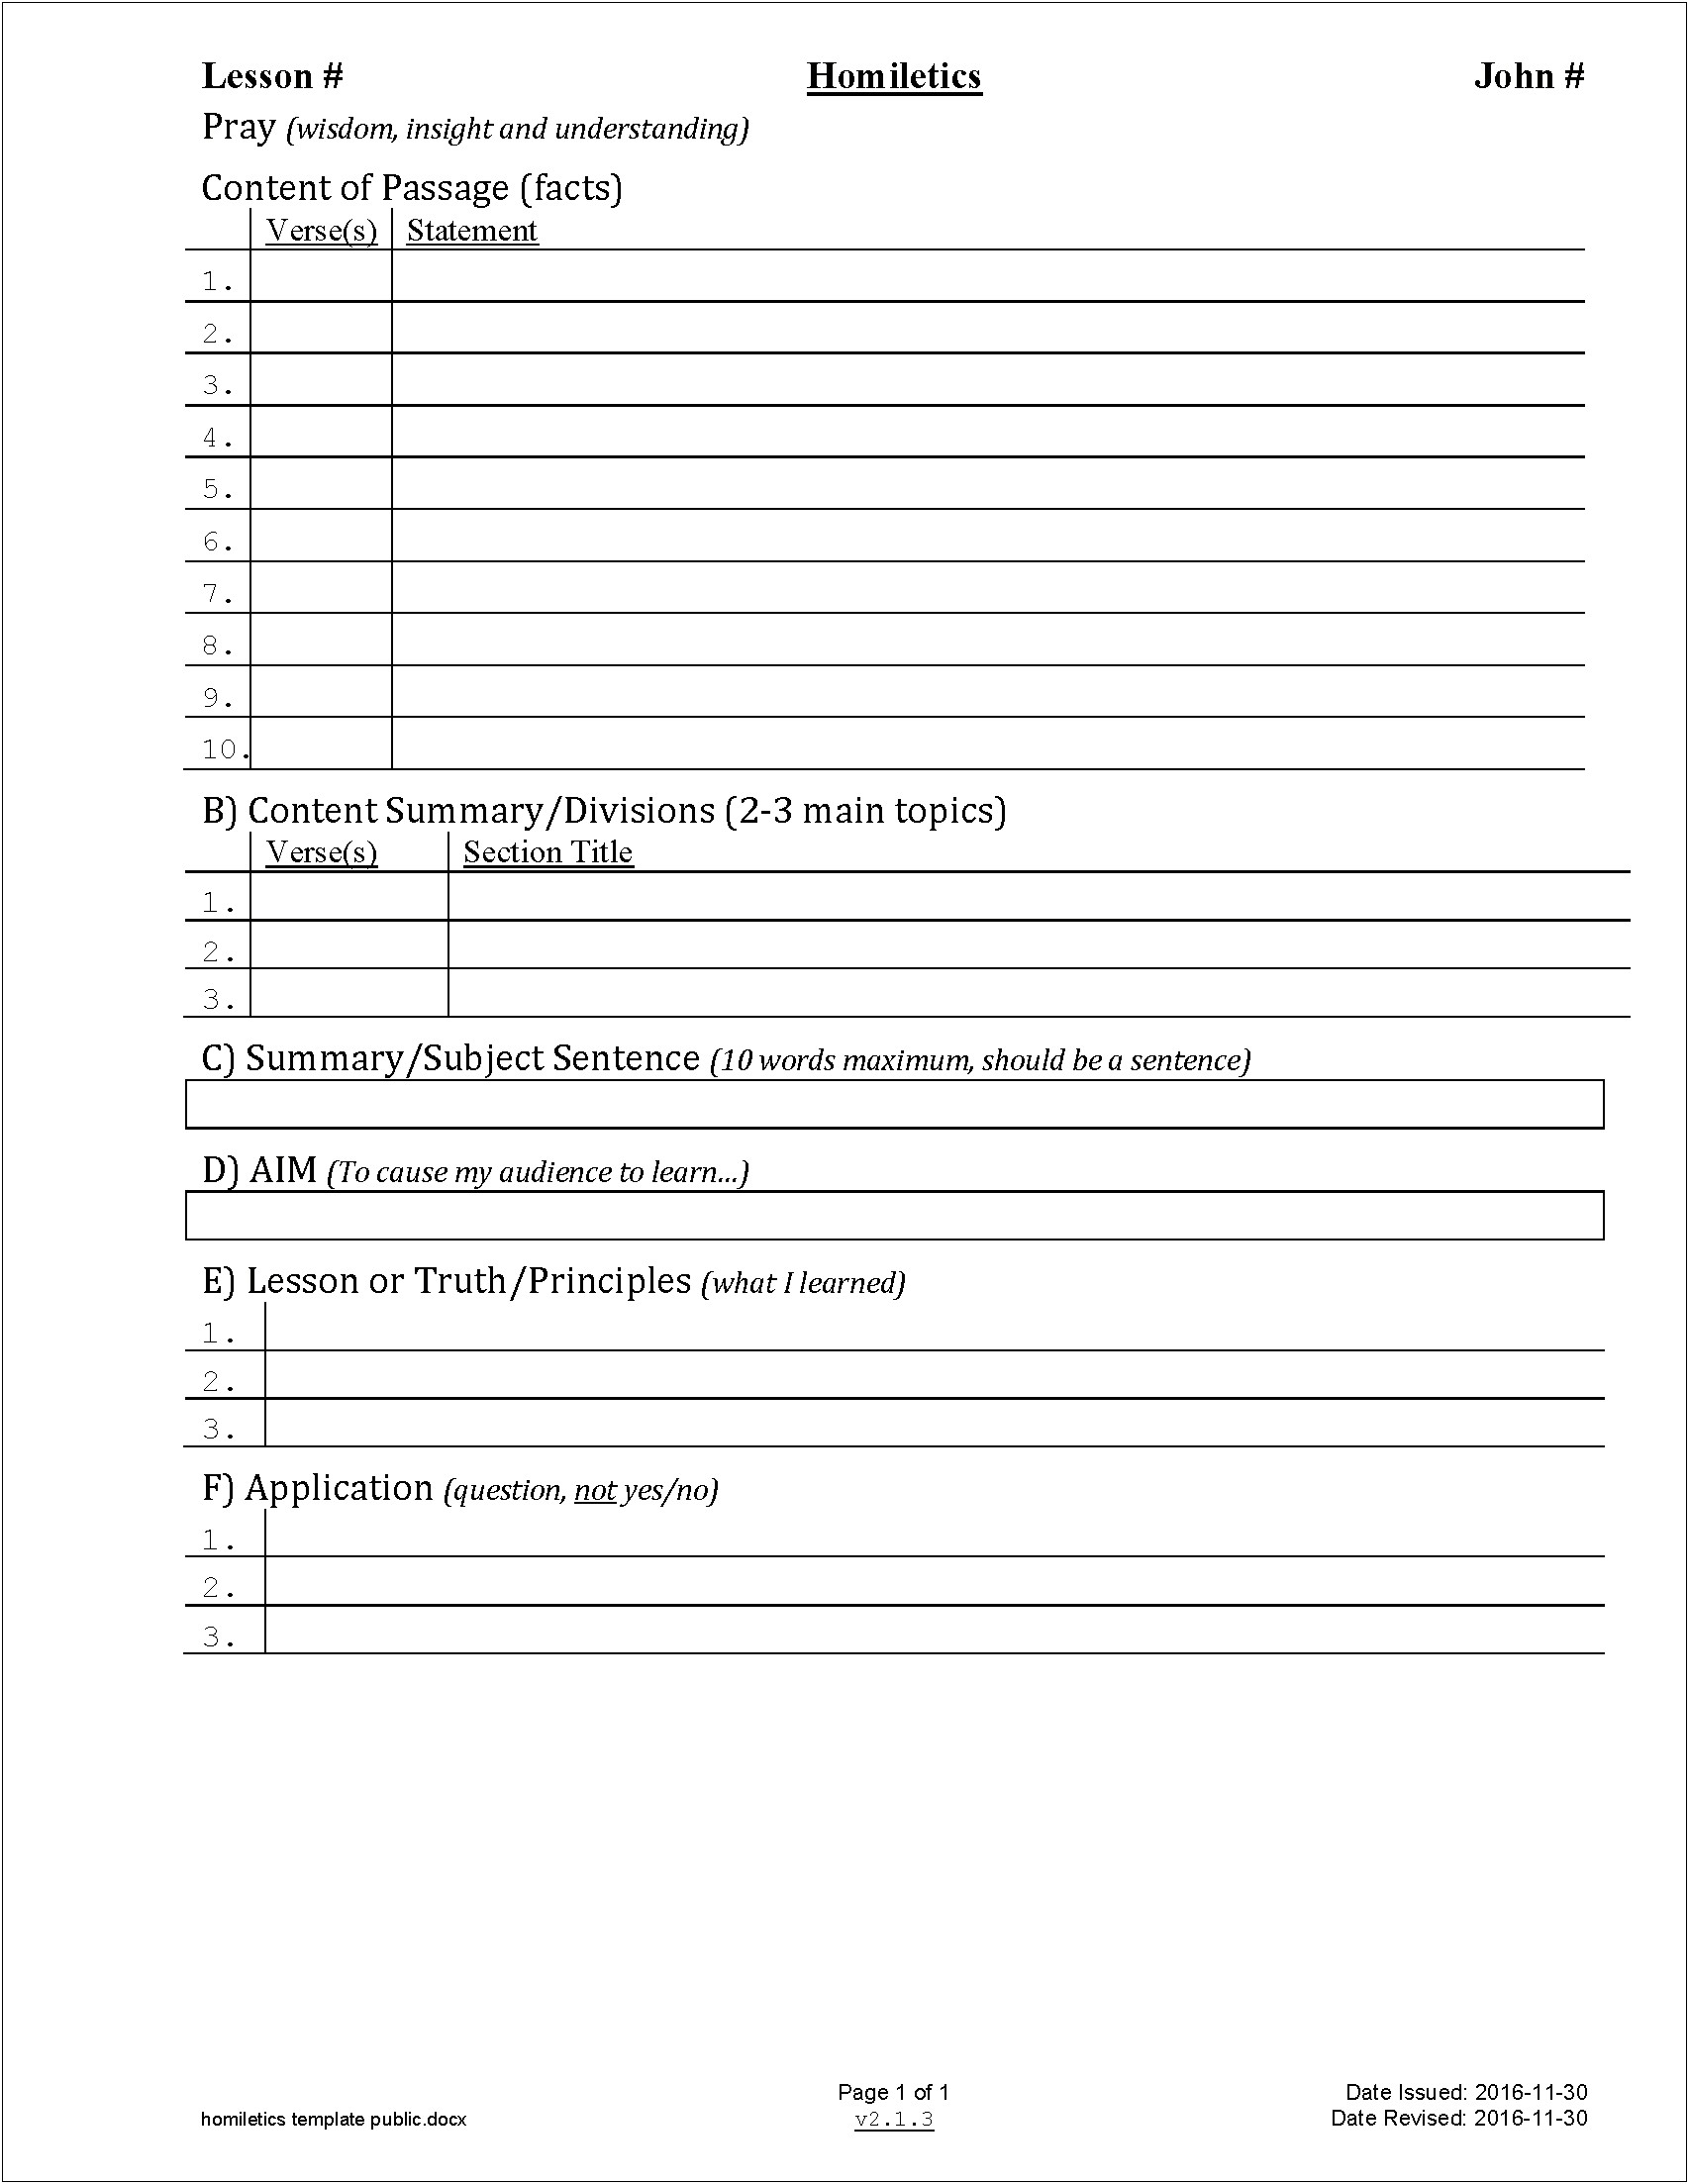 Blank Homiletics Template In A Word Document